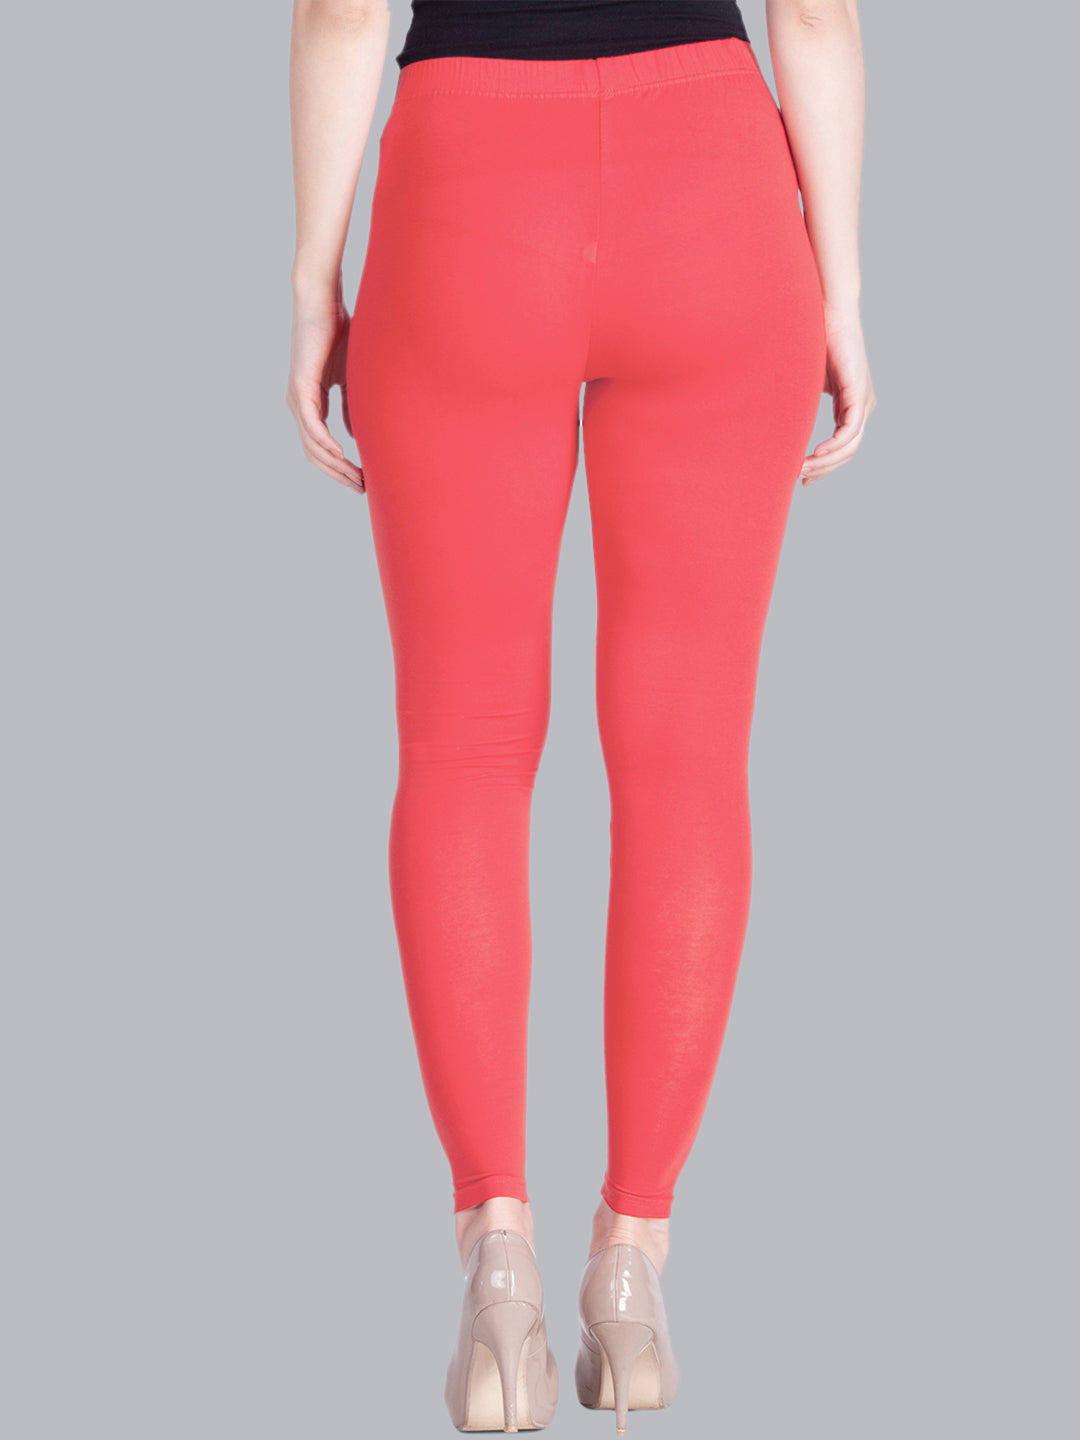 LUX LYRA Women's Pack of 1 Red Color Leggings (Yoga Pants 1PC Red Free  Size) | eBay